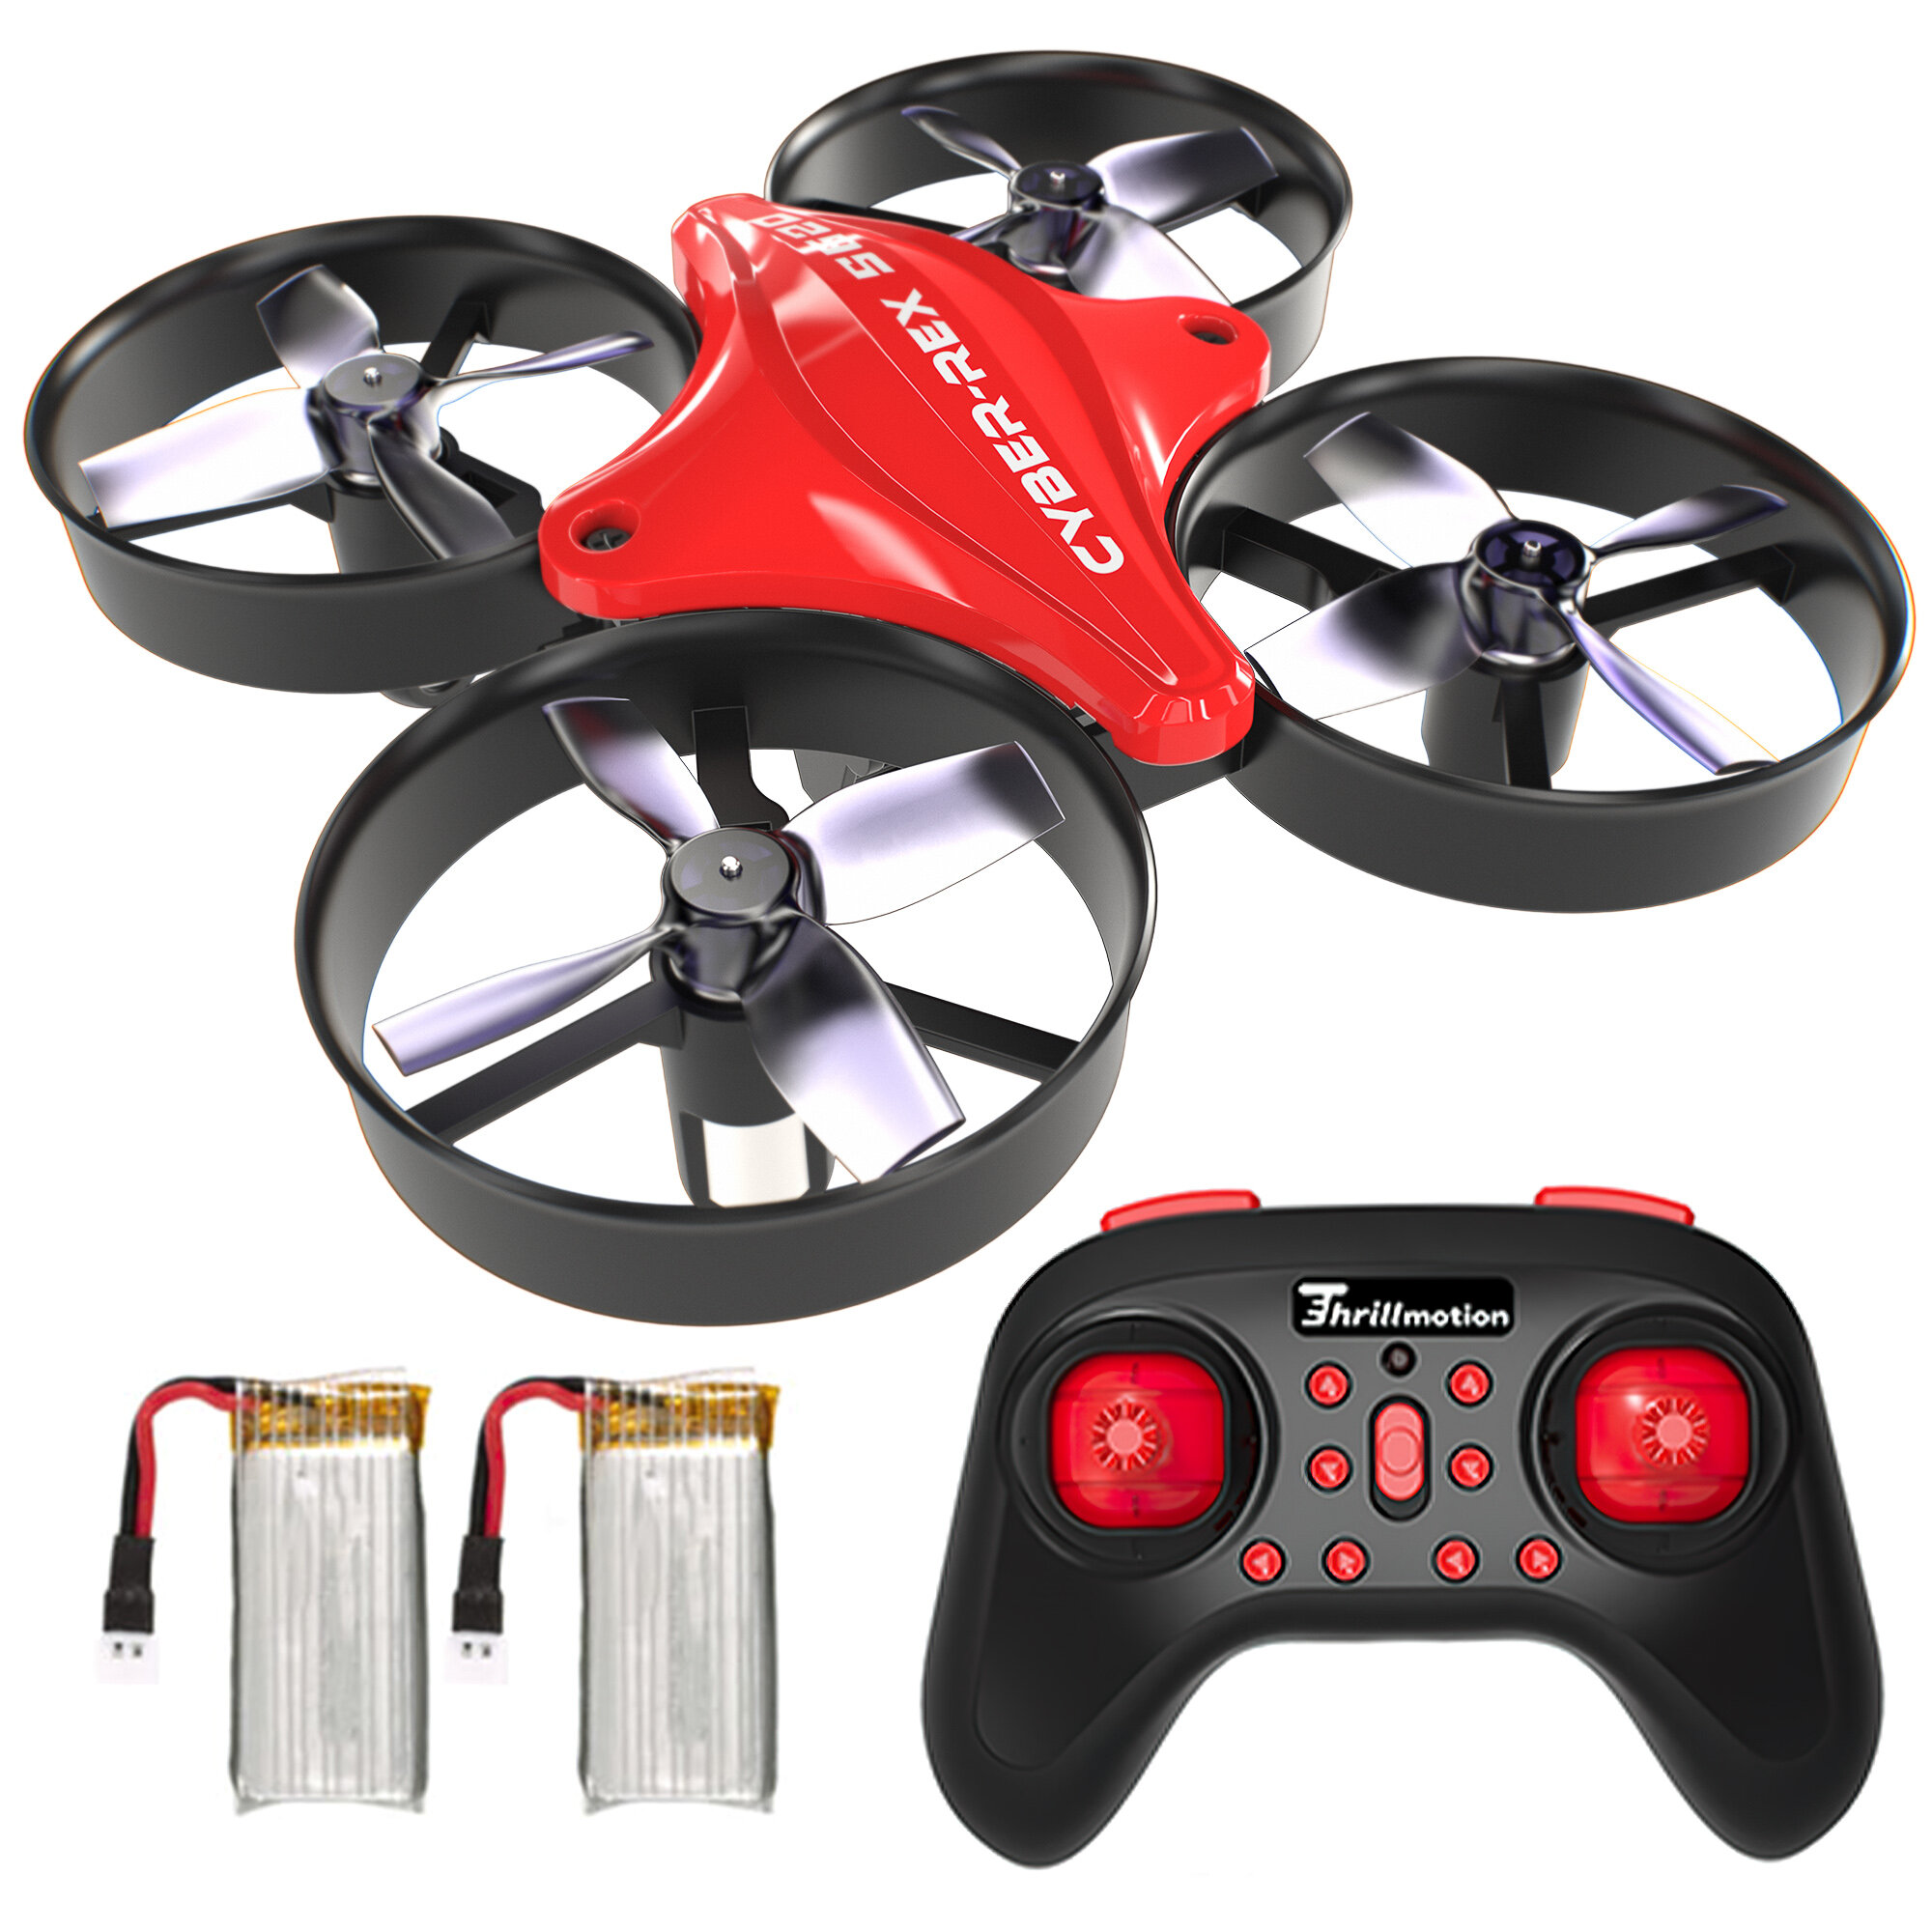 

Emax Thrill Motion Cyber-Rex S620 Altitude Hold Headless Mode 360° Rolling Two Batteries 2.4G 6CH Beginner Flight Practi